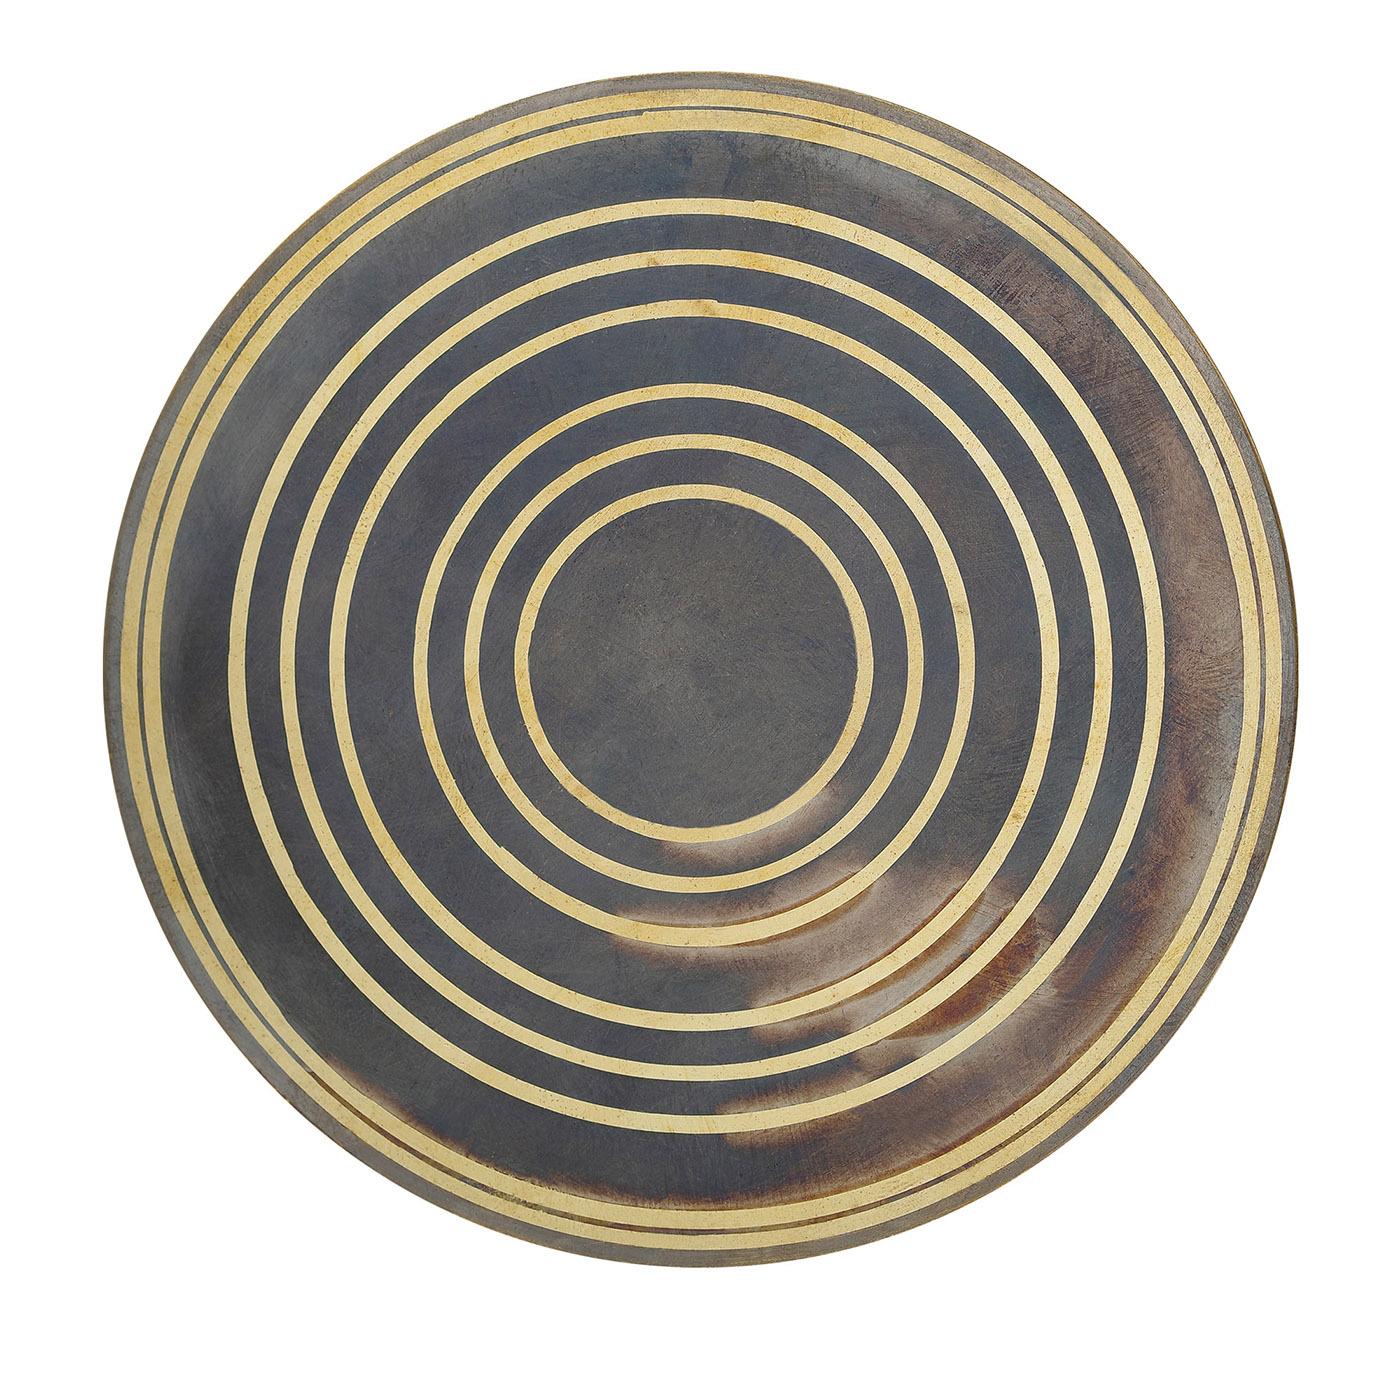 A clever use of oxides on brass lends this set of six coasters an outstanding abstract look defined by concentric elements inspired by the Aniconism, or the opposition of visually depicting living and supernatural creatures. Their backs are covered